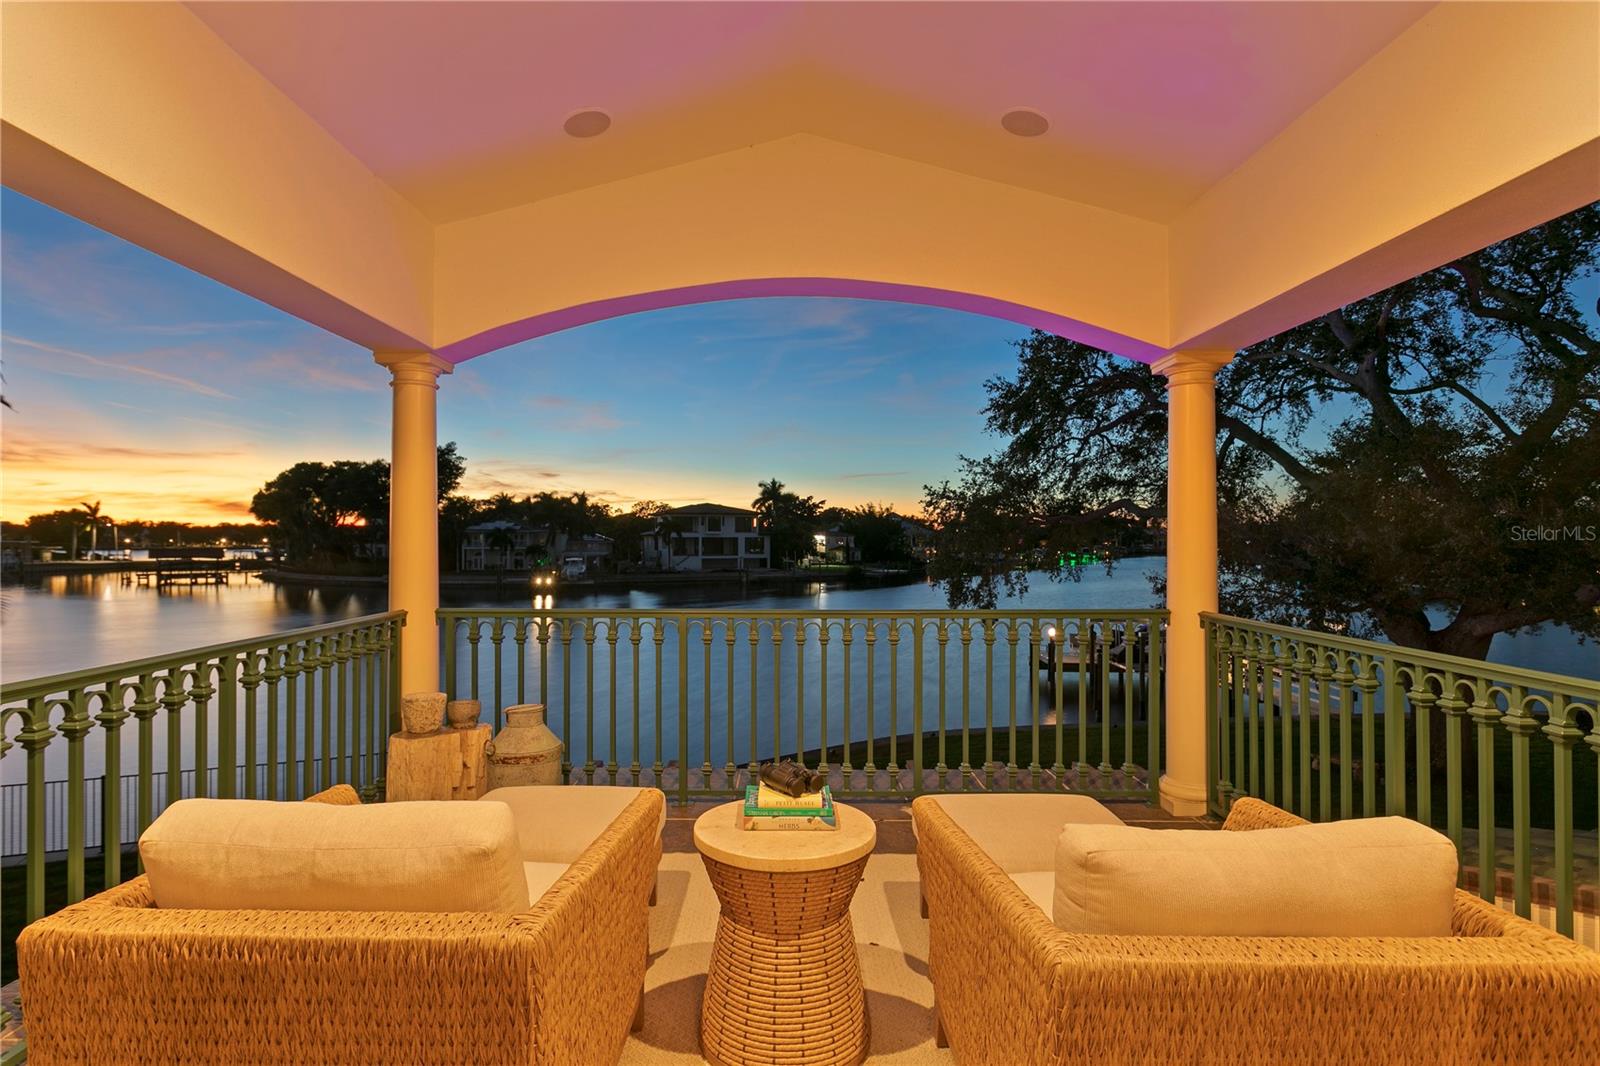 The sunsets are calling you! Enjoy a glass of wine on your private balcony.